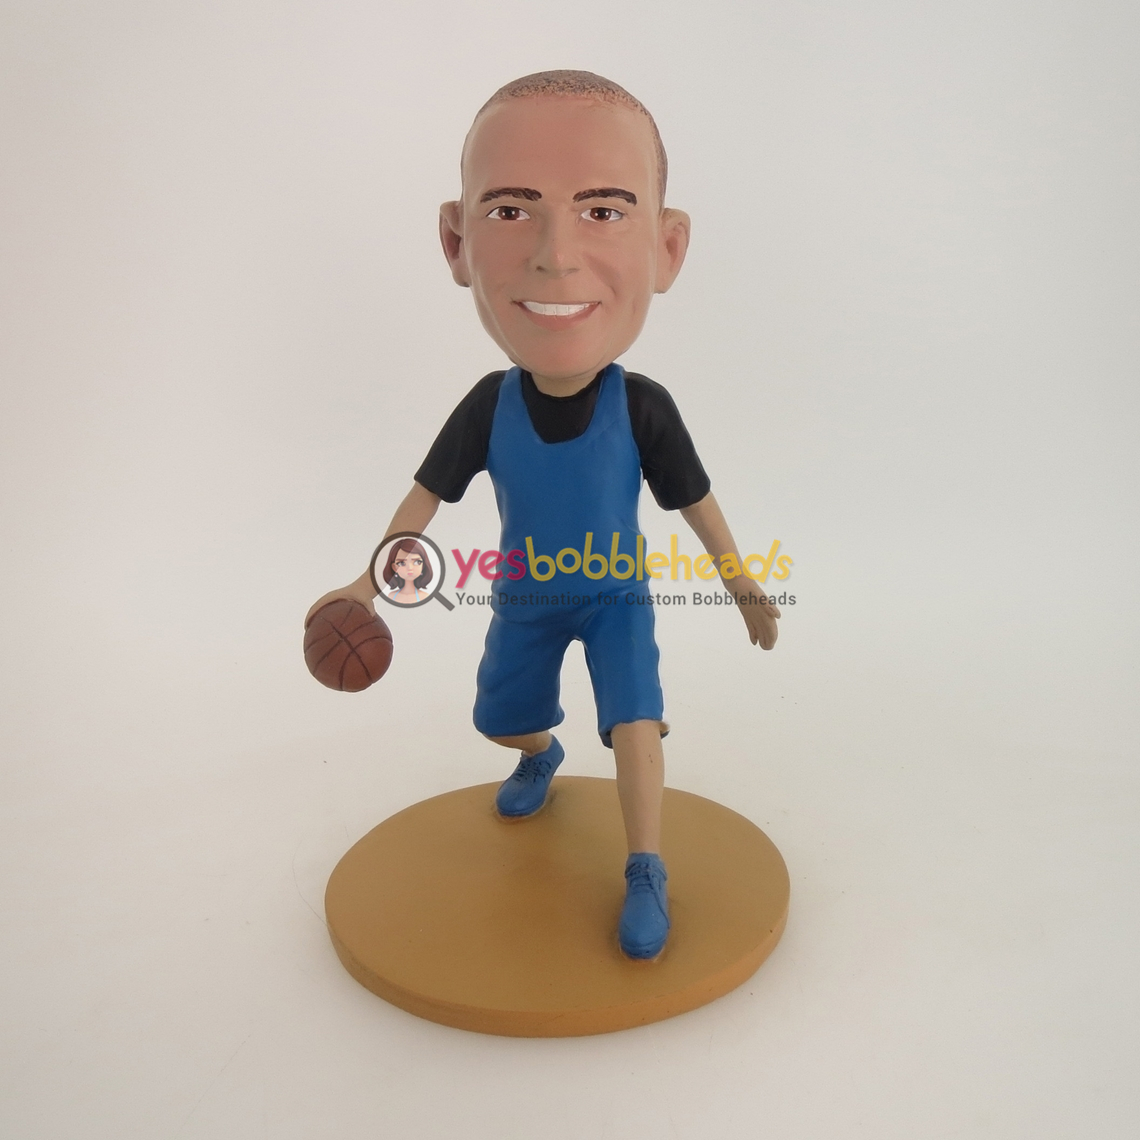 Picture of Custom Bobblehead Doll: Handsome Basketball Player